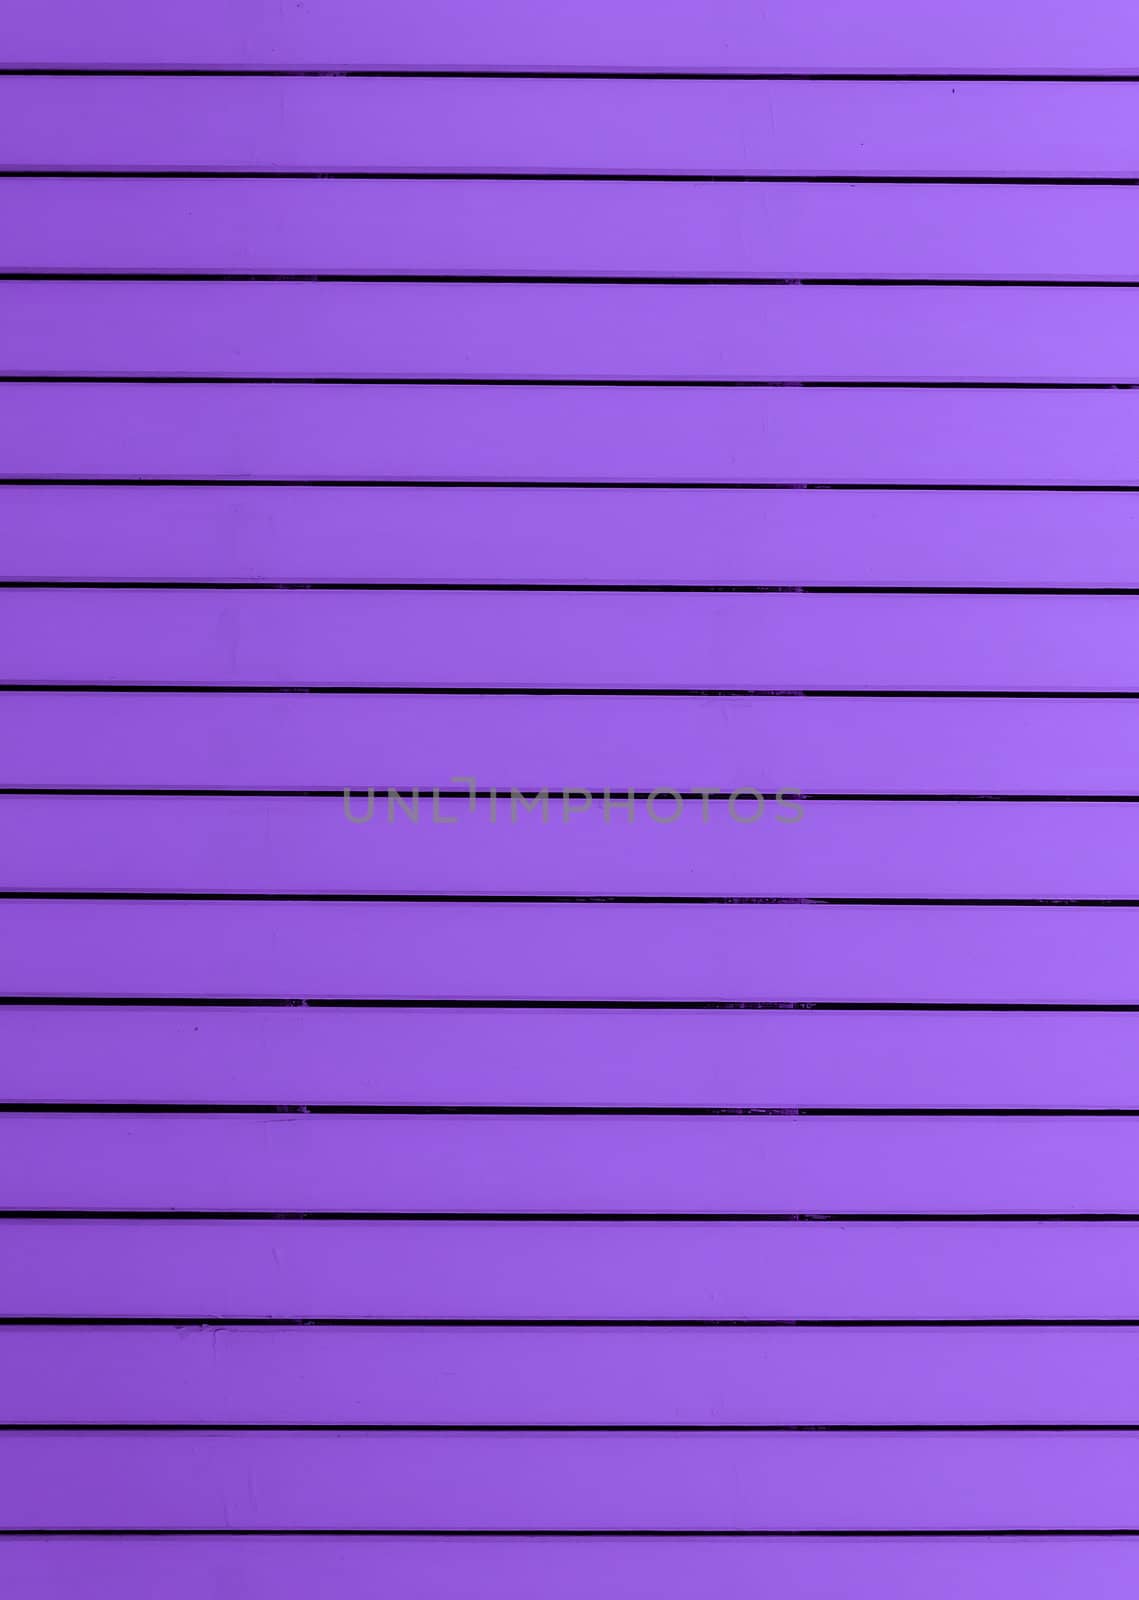 Wood background in horizontal pattern, purple color.